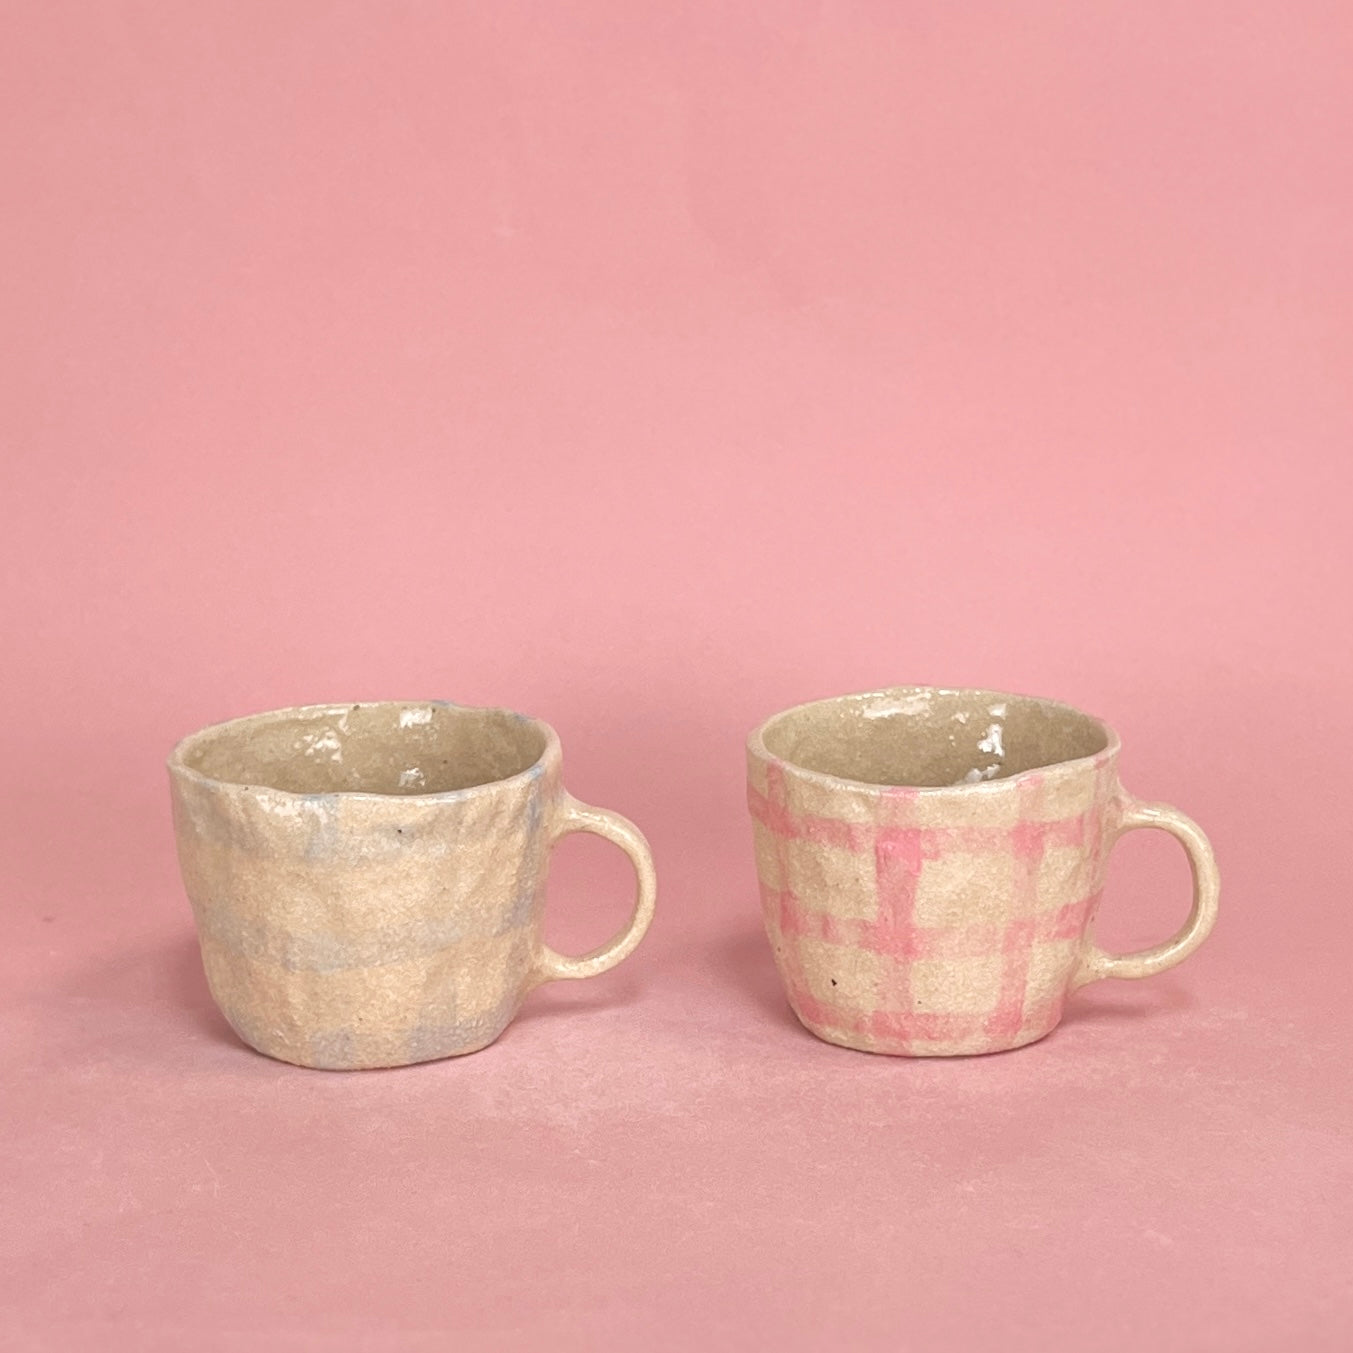 Gingham Puppy and Bunny Pinch Mugs